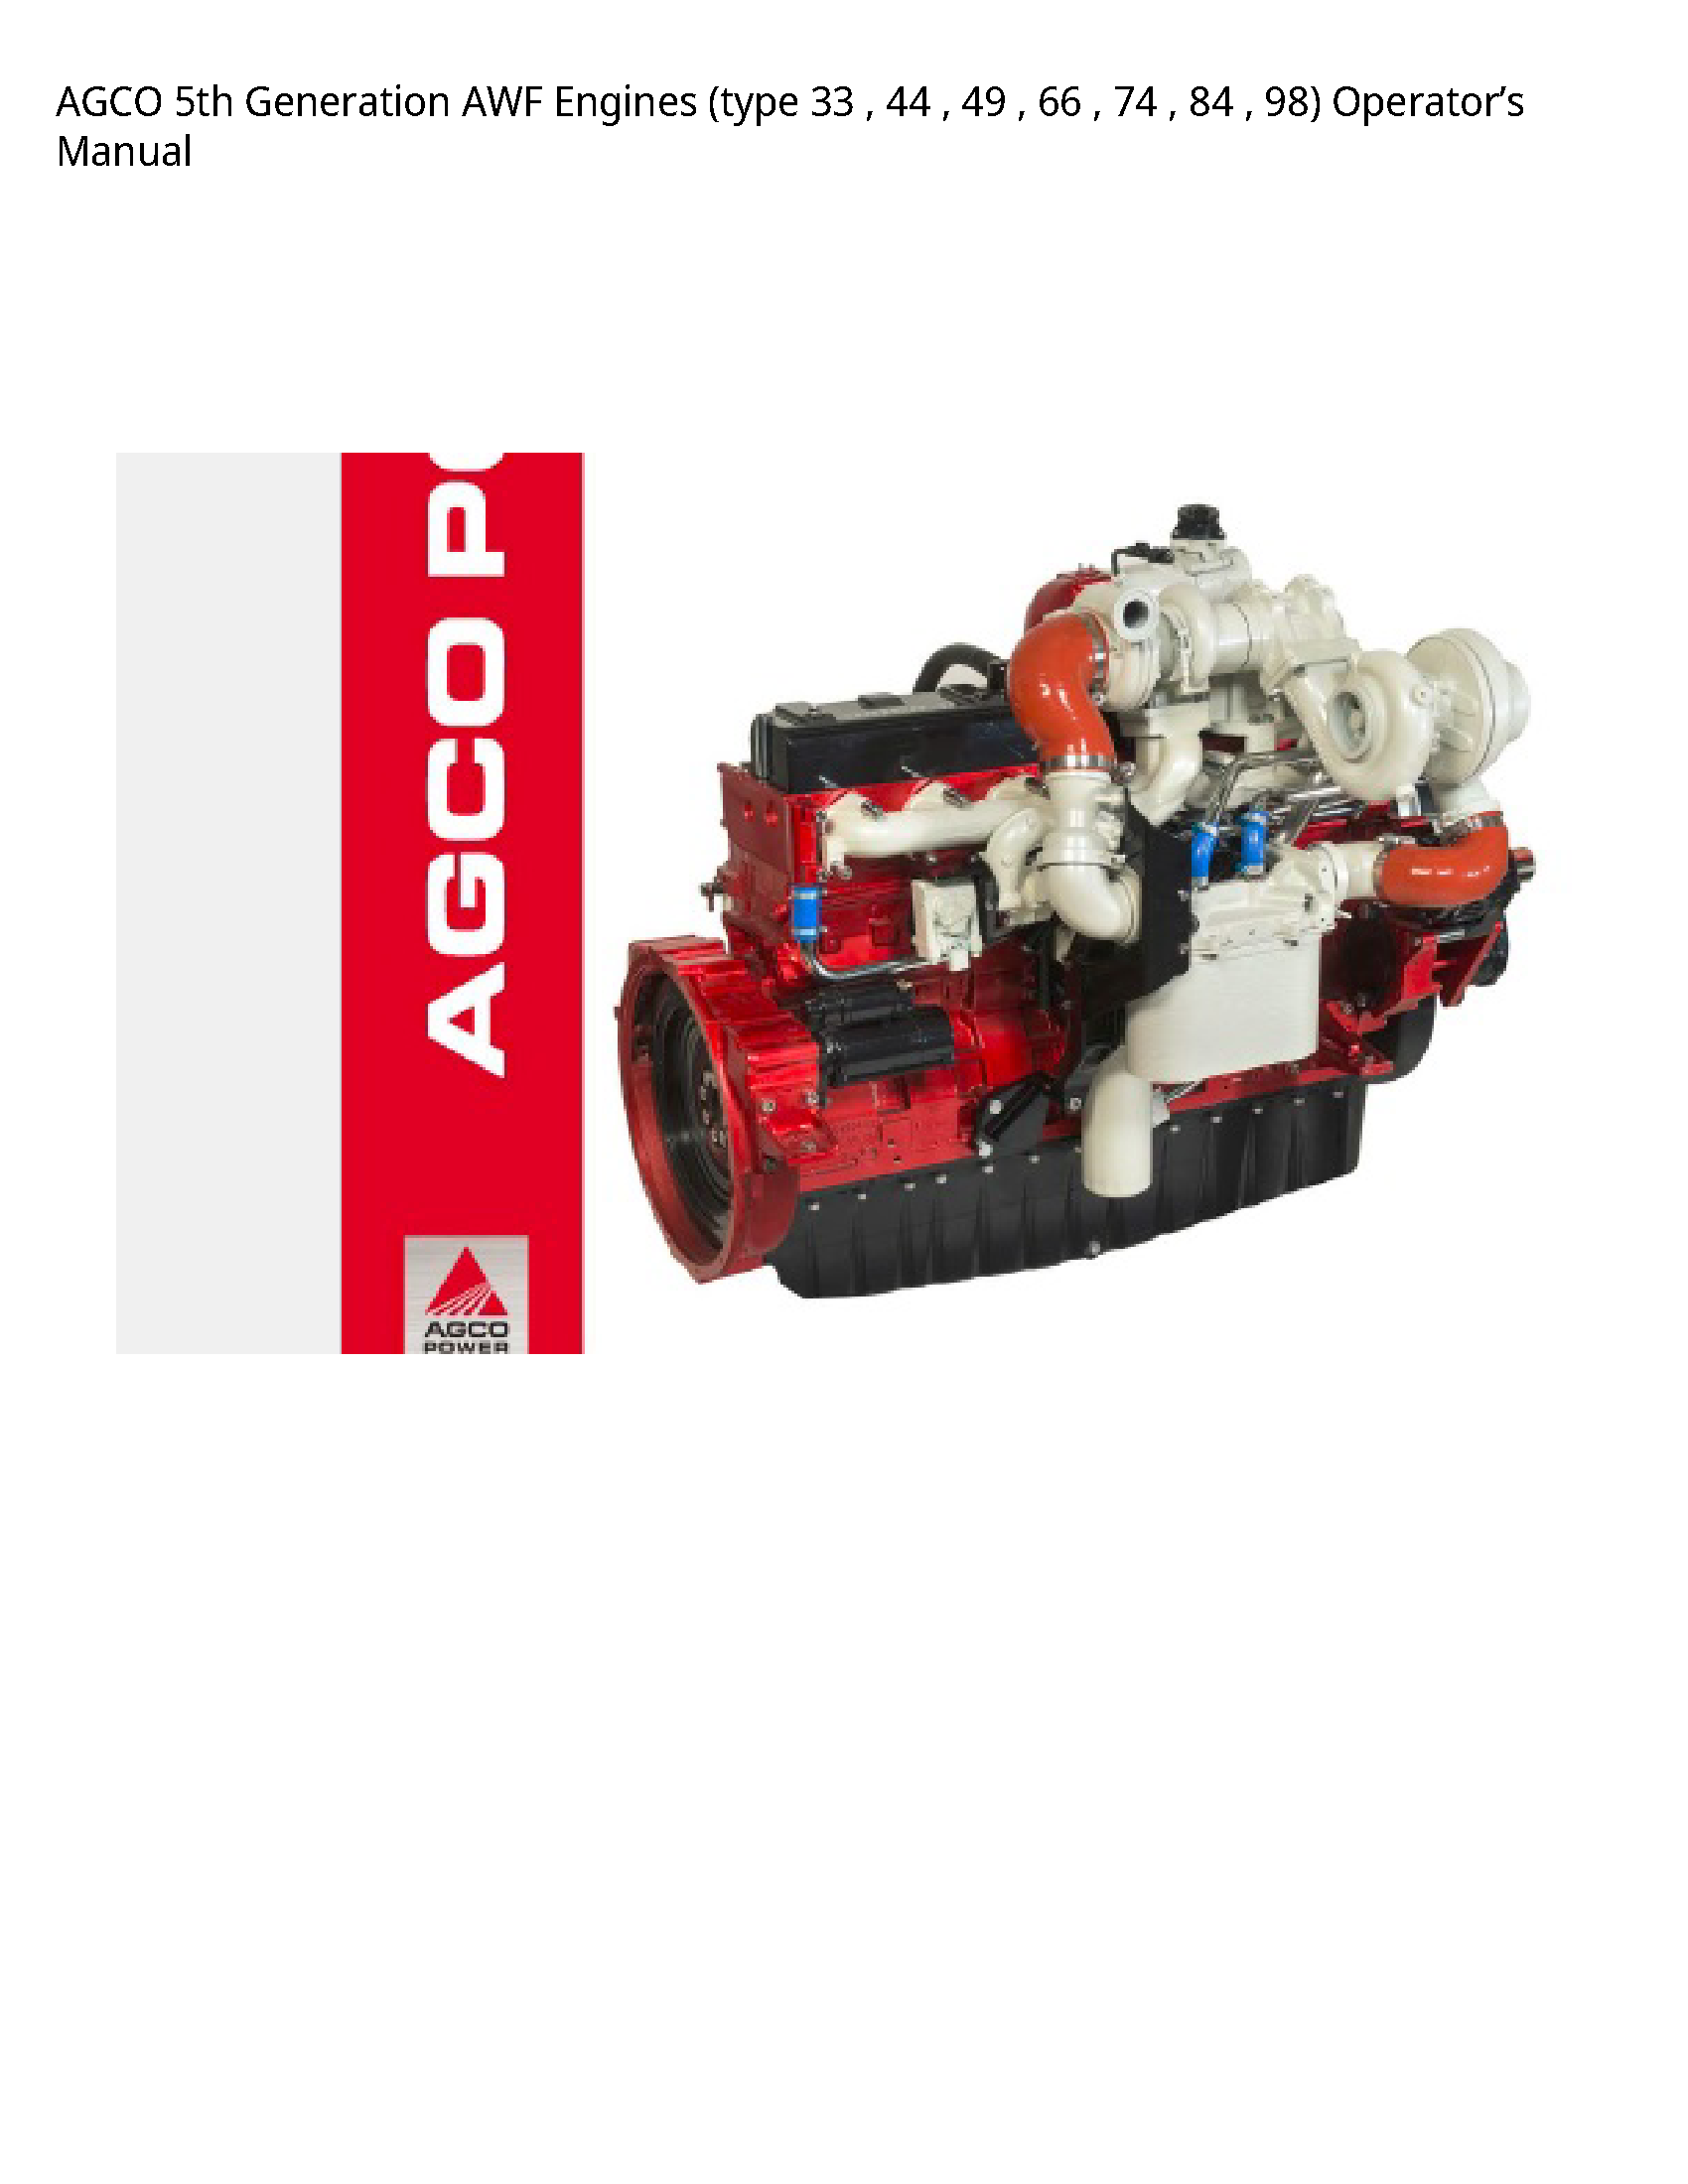 AGCO 5th Generation AWF Engines (type Operator’s manual